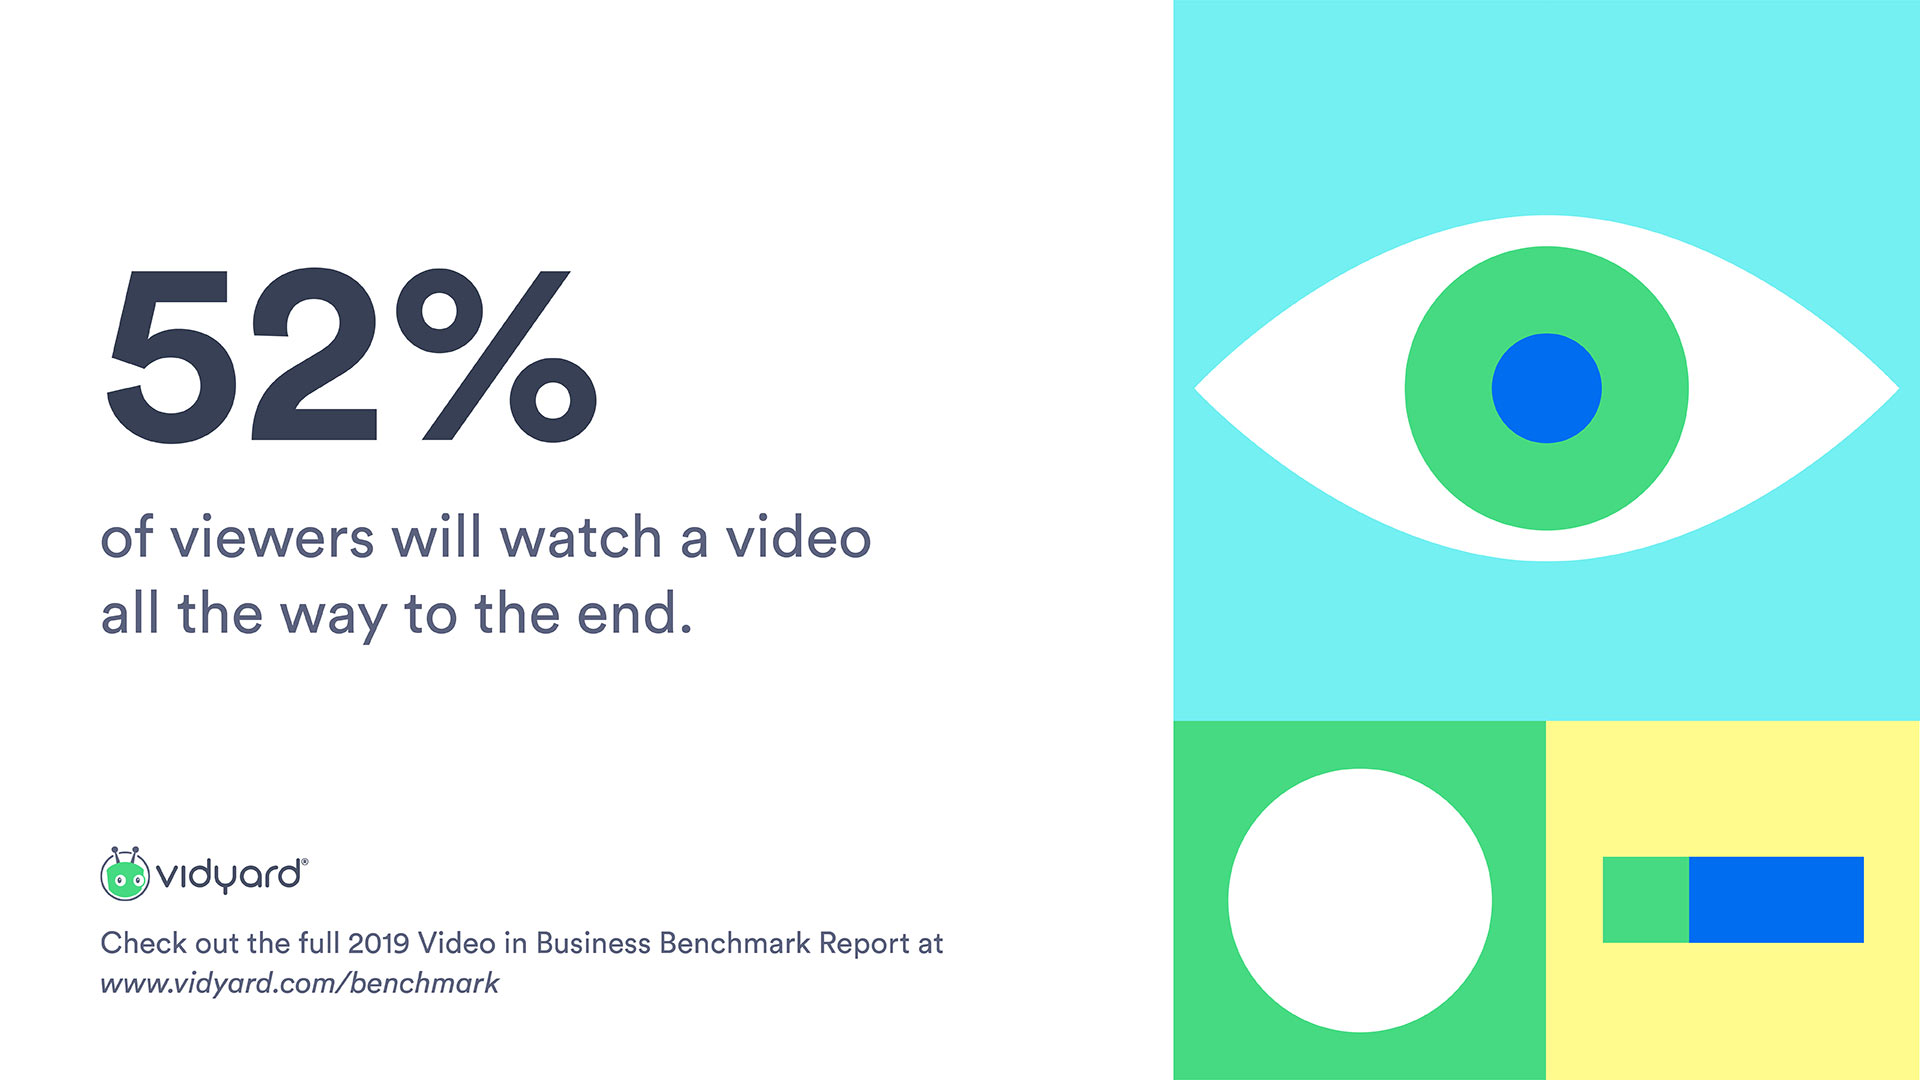 graphic shows a stat about viewer watch time from the 2019 Video in Business Benchmark Report